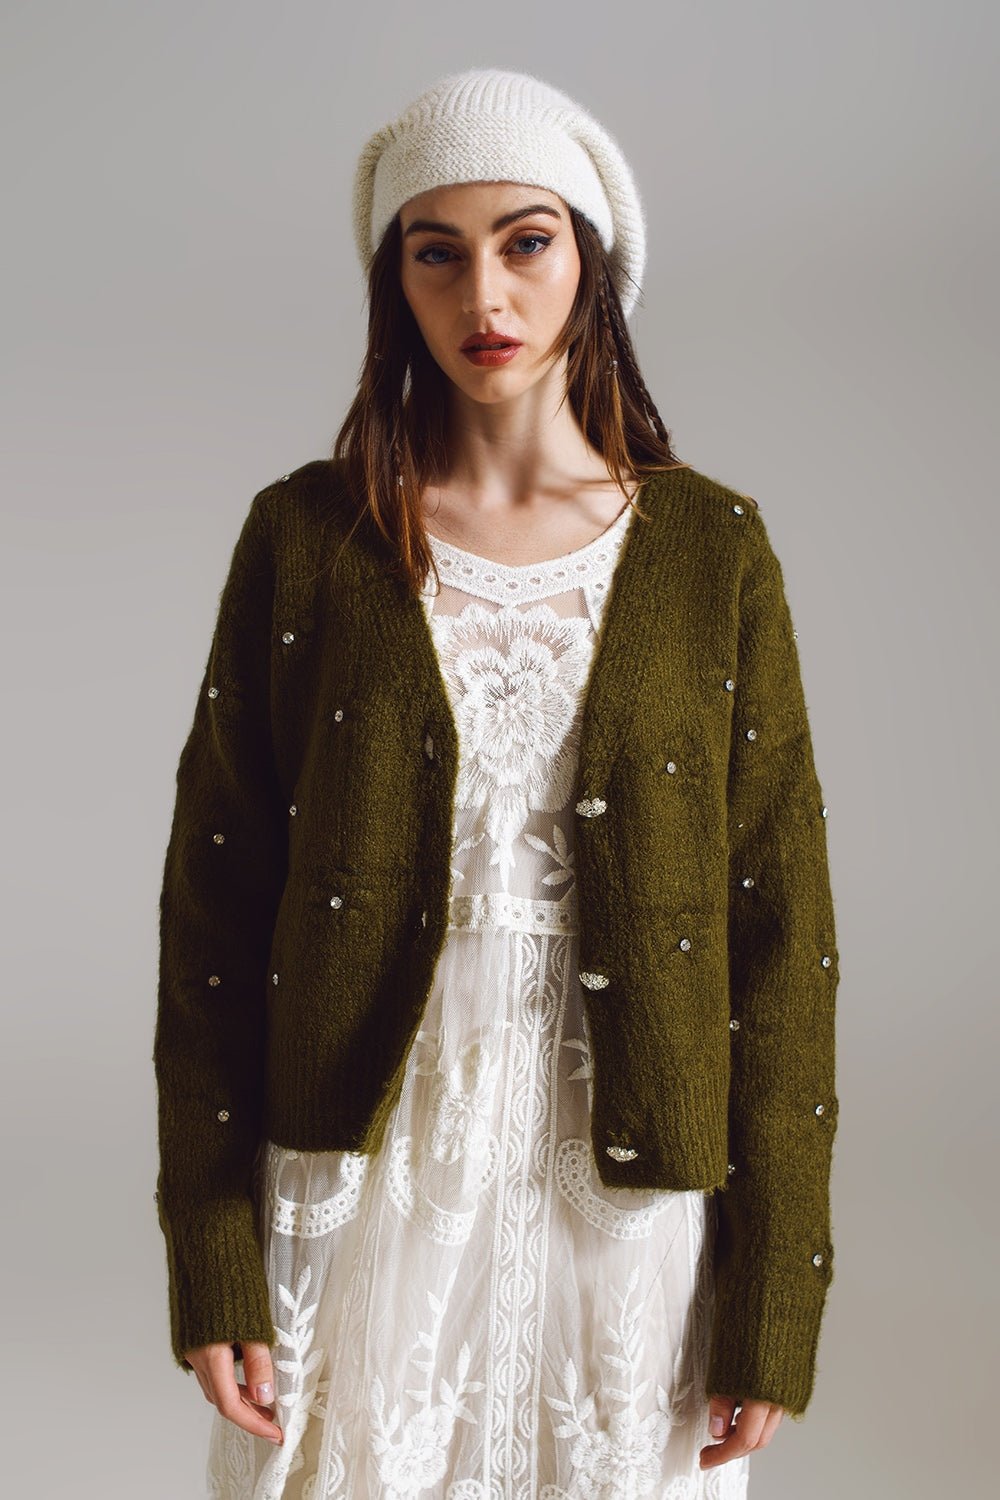 Brown Cardigan With Knitted Flowers and Embellished Details in Military Green - Mack & Harvie